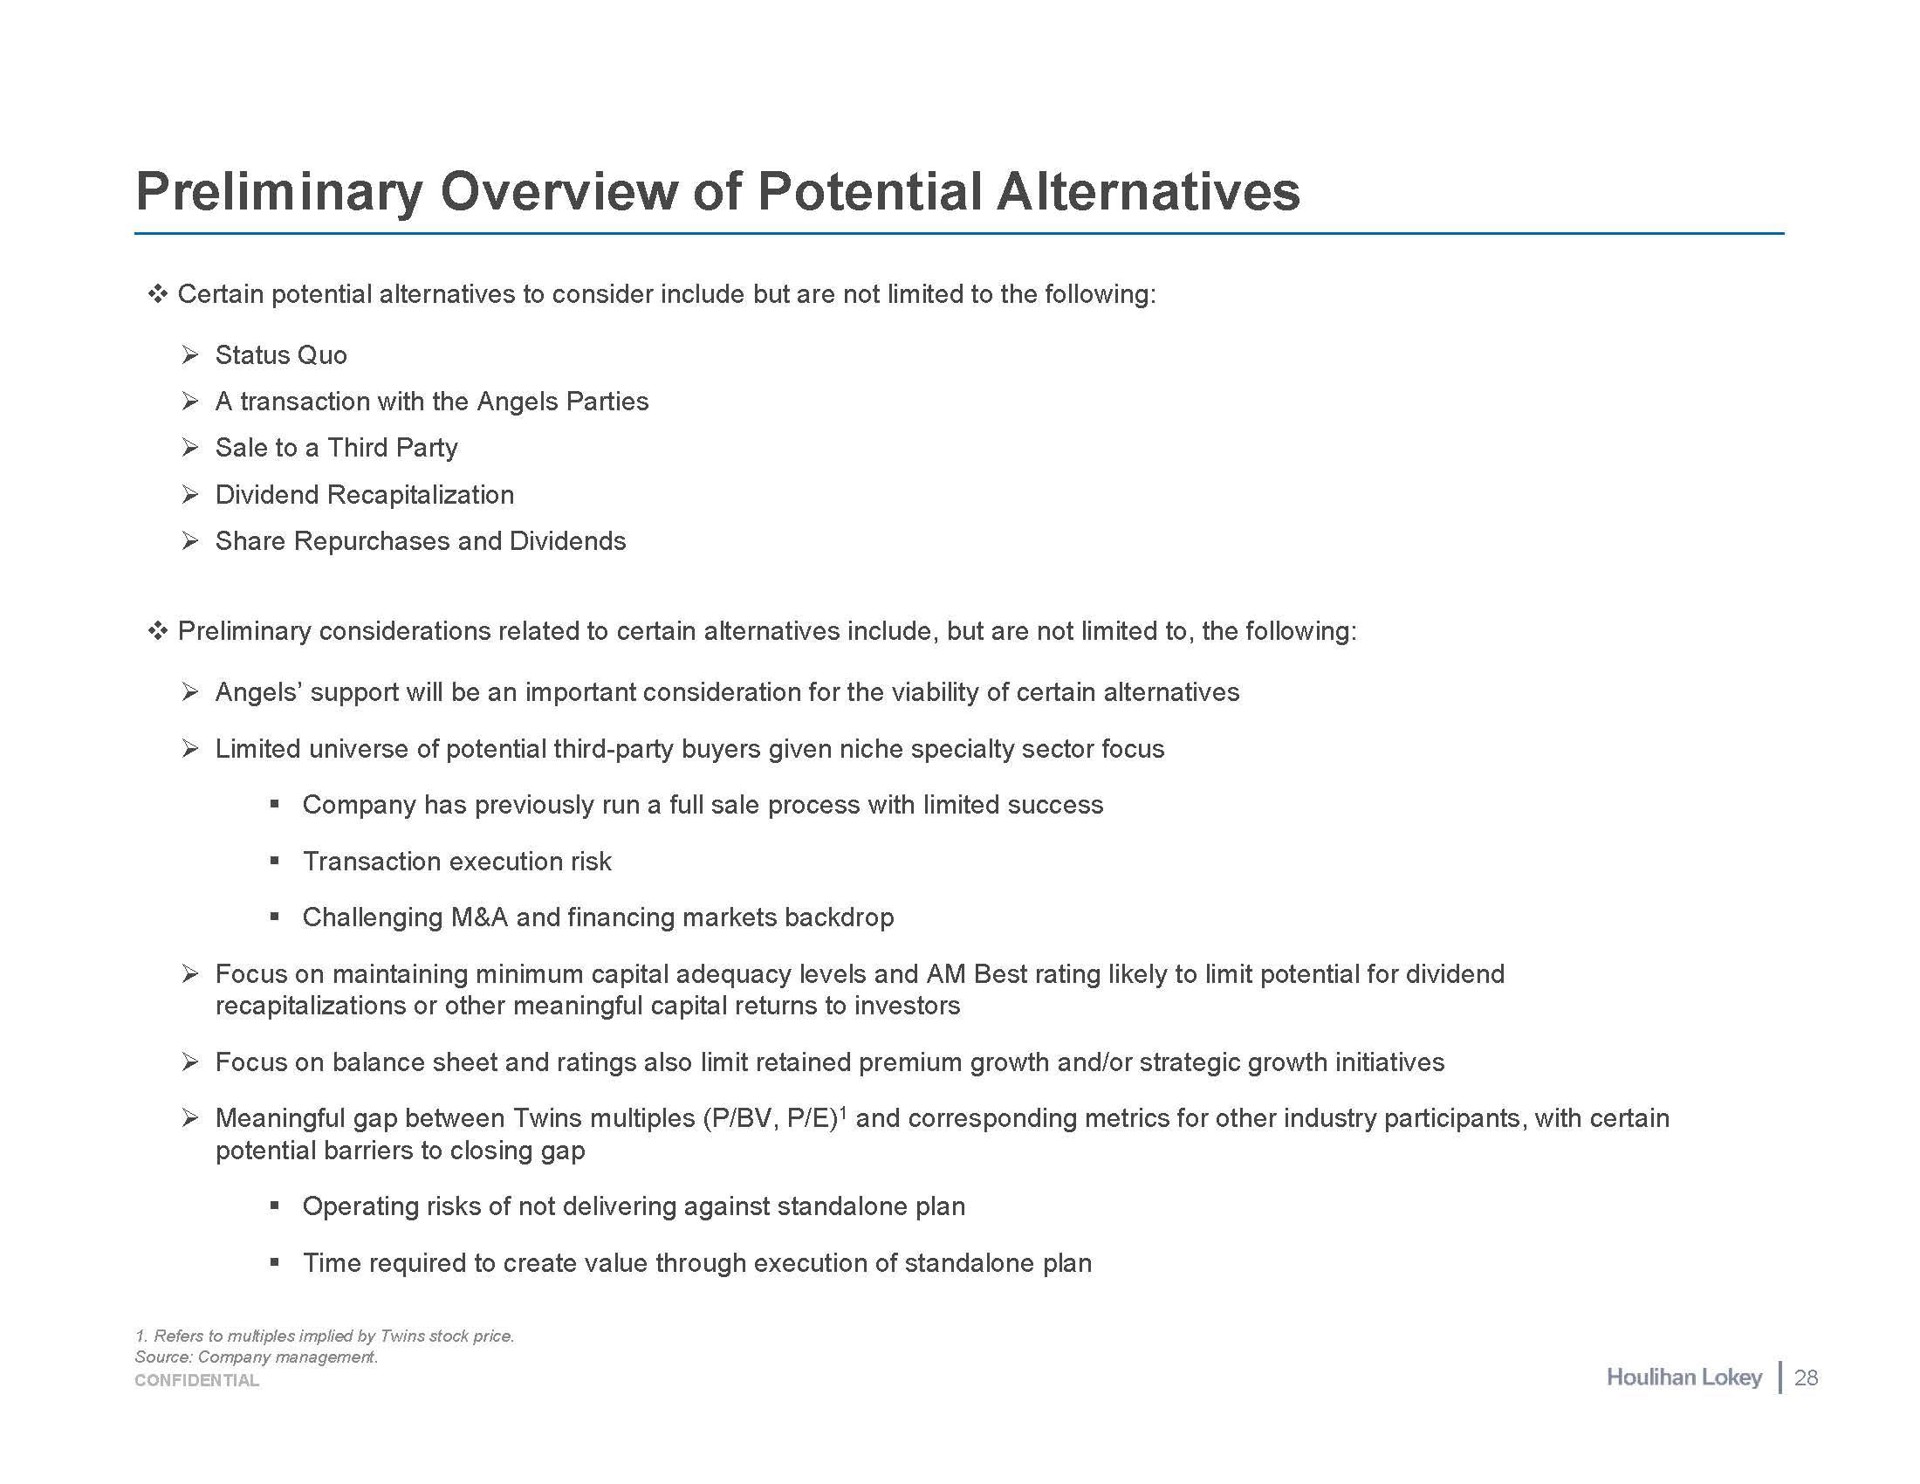 preliminary overview of potential alternatives | Houlihan Lokey